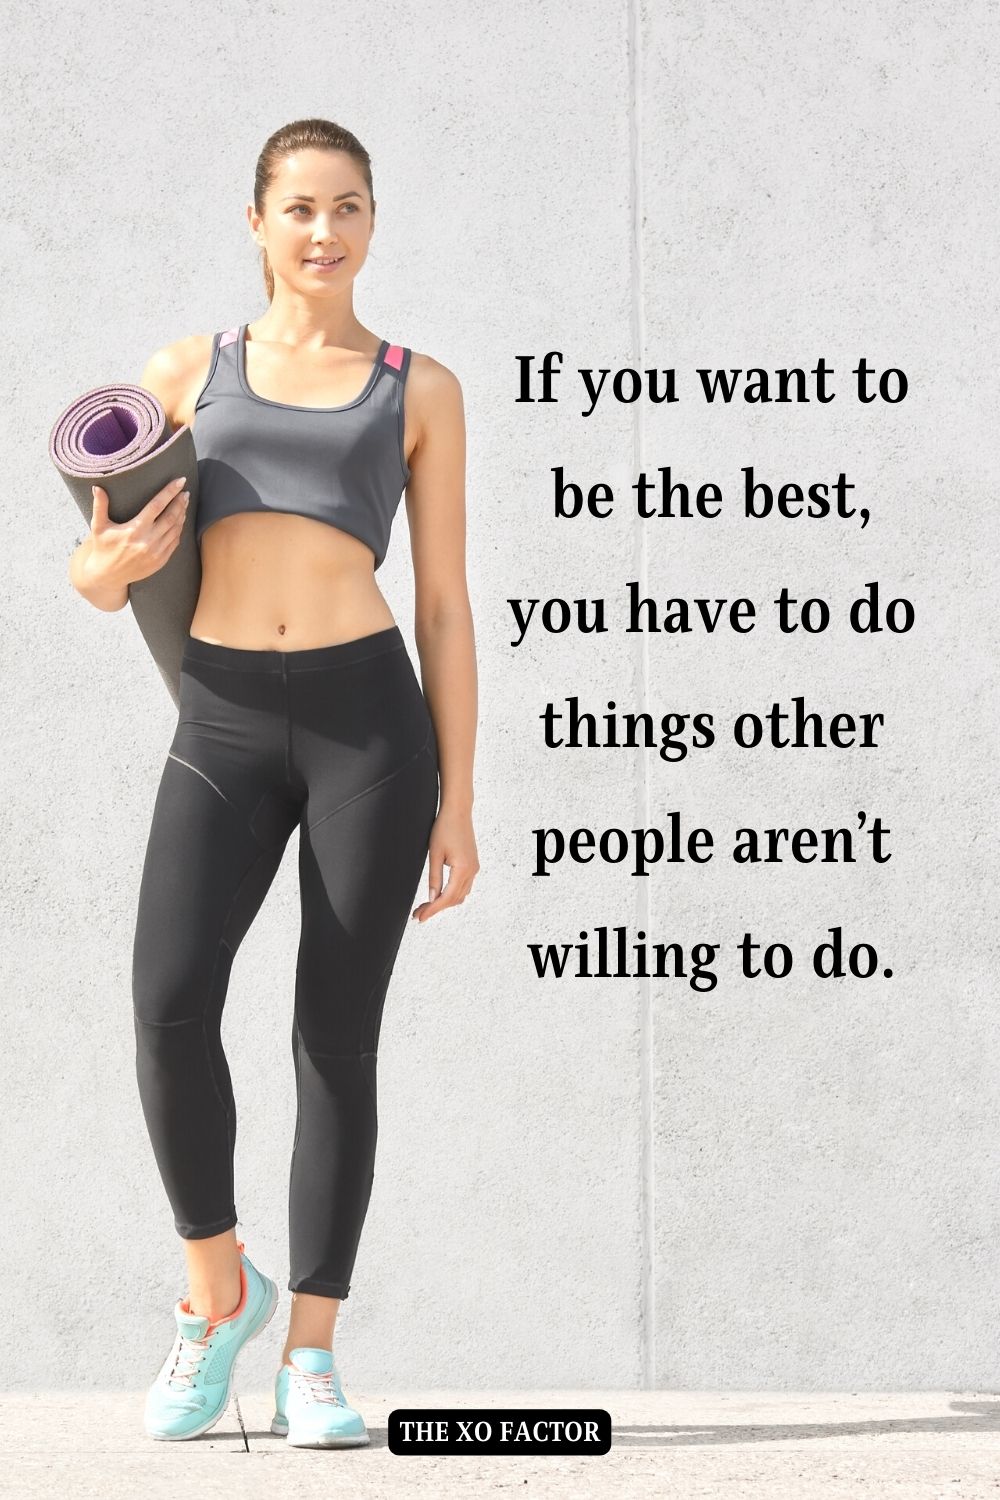 If you want to be the best, you have to do things other people aren’t willing to do.